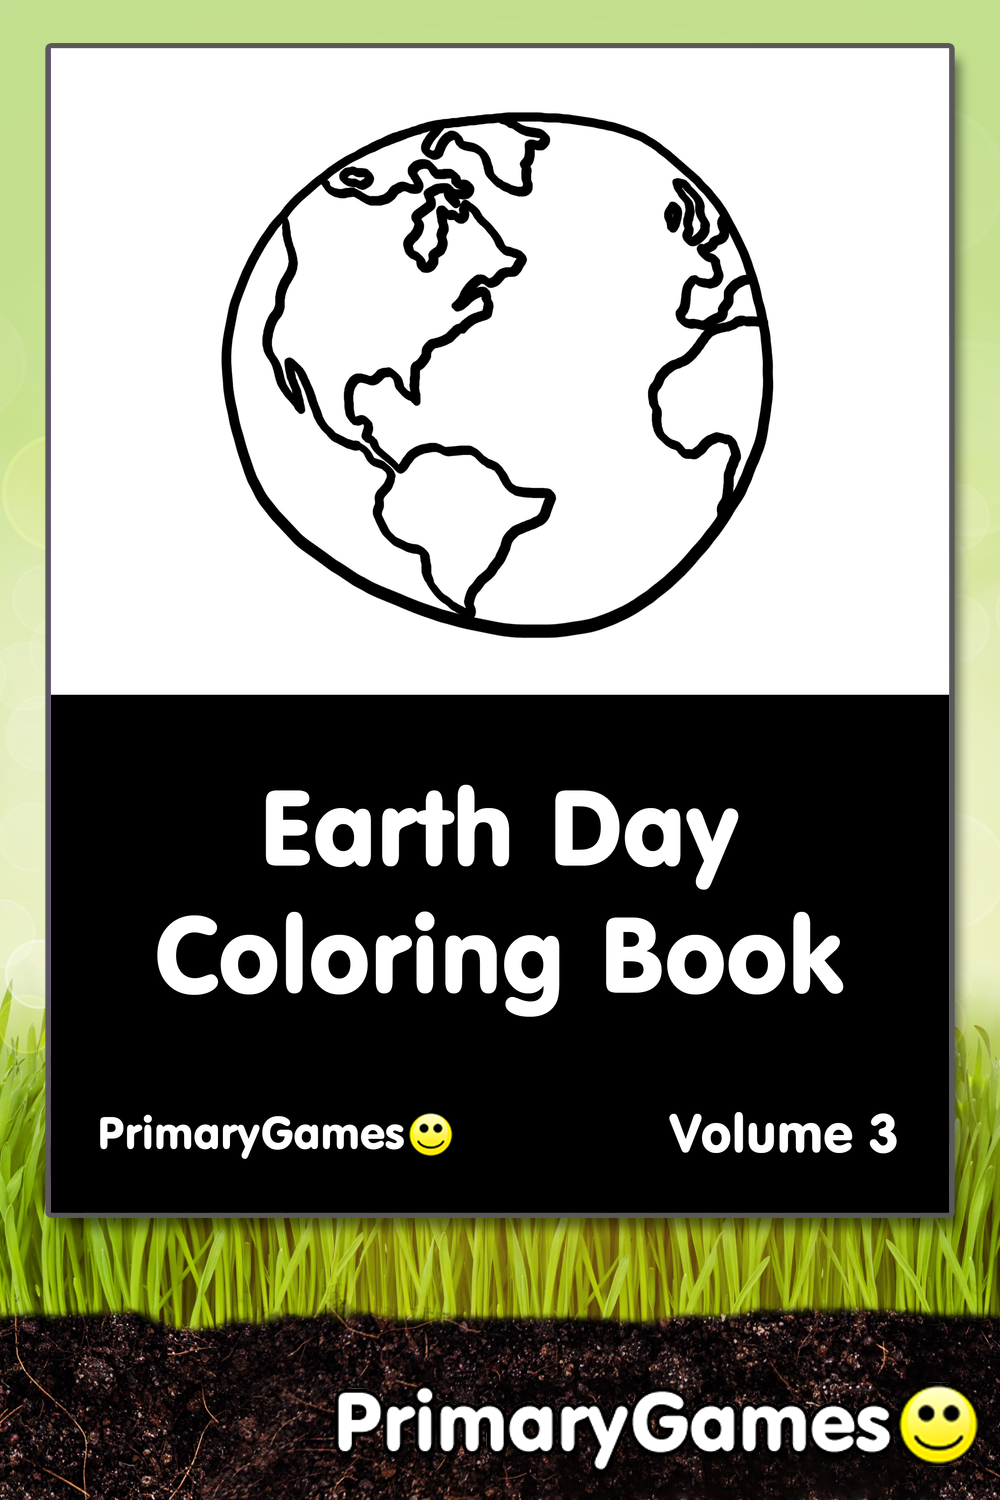 Download Earth Day Coloring eBook: Volume 3 • FREE Printable PDF ...